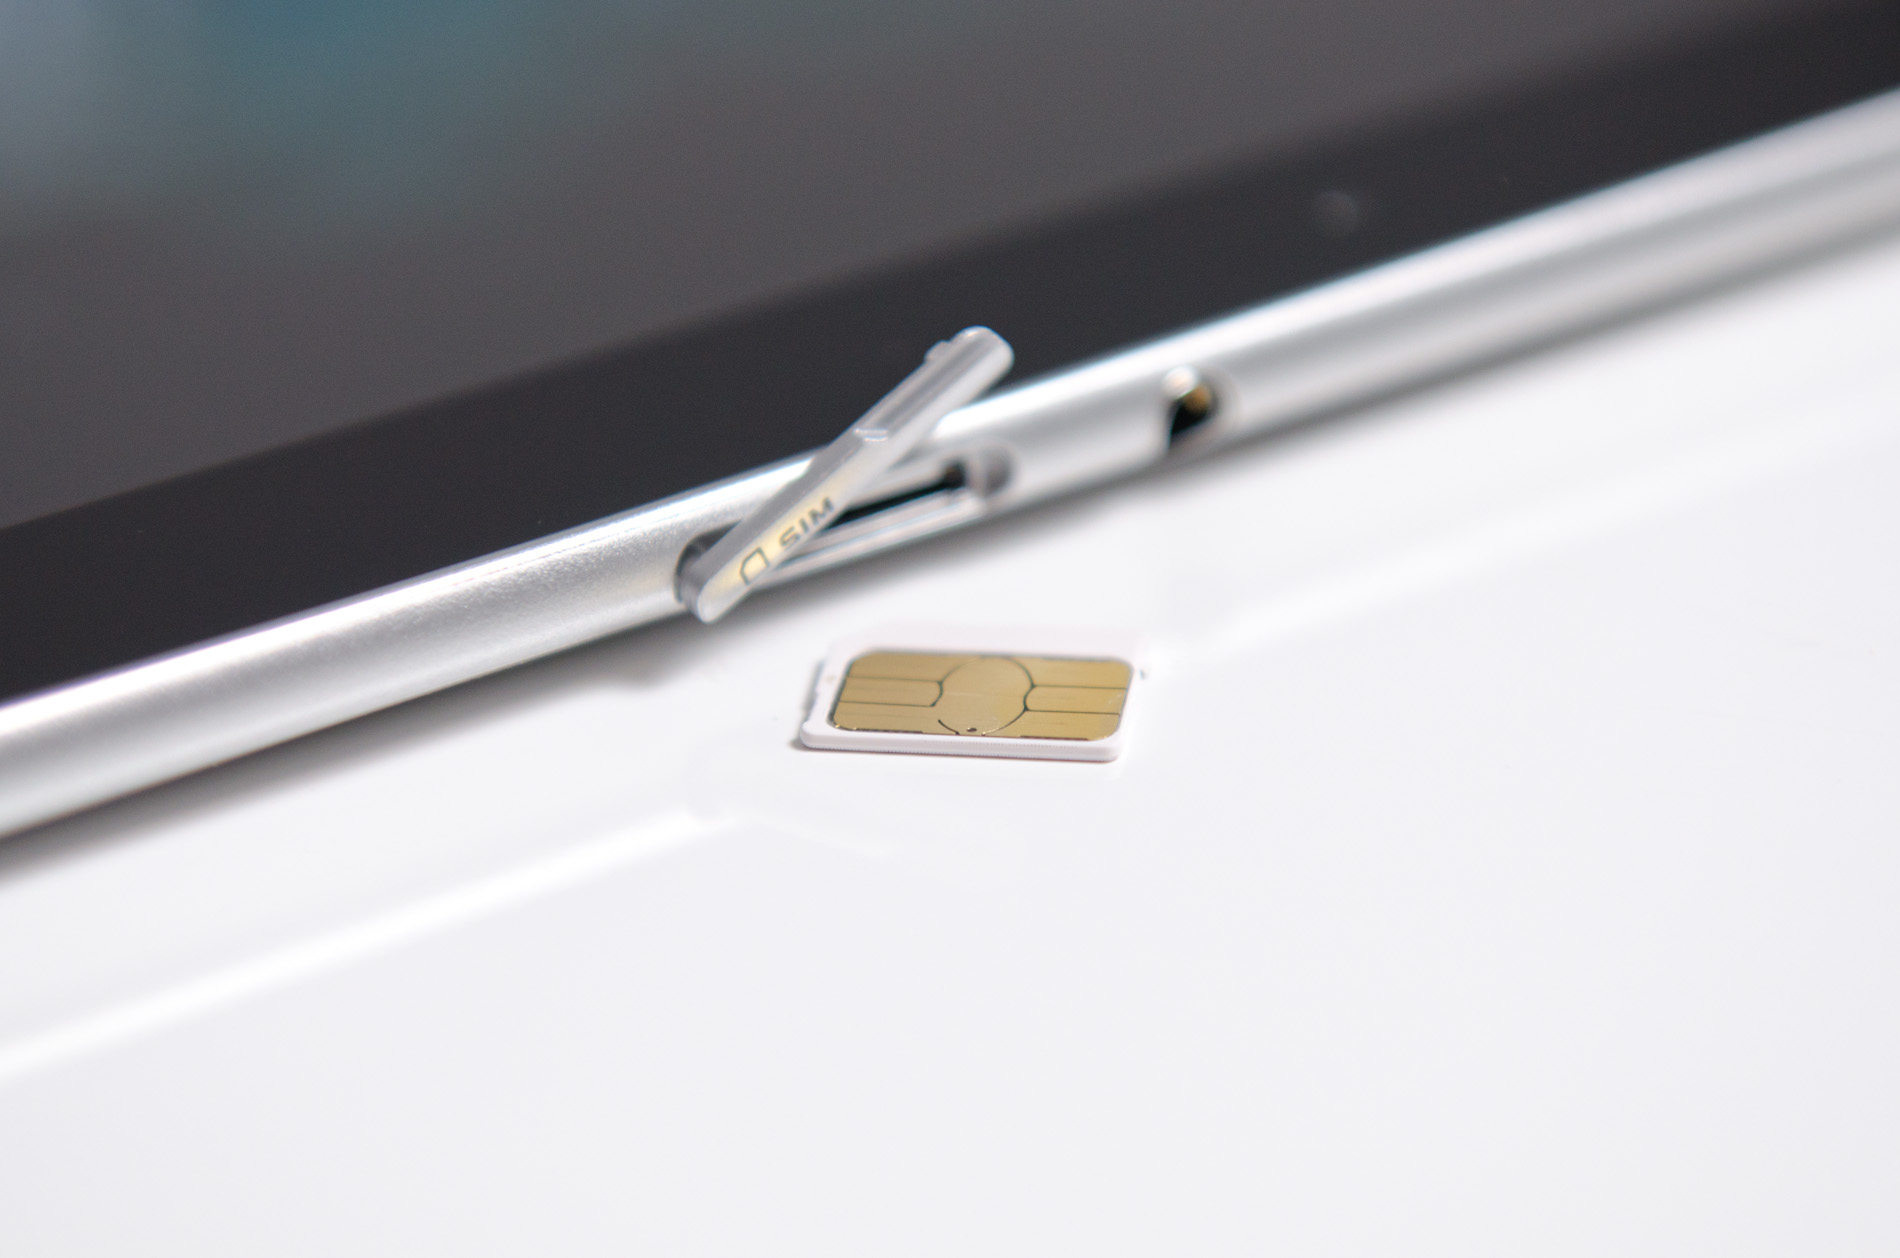 How To Put A Sim Card In A Samsung Tablet